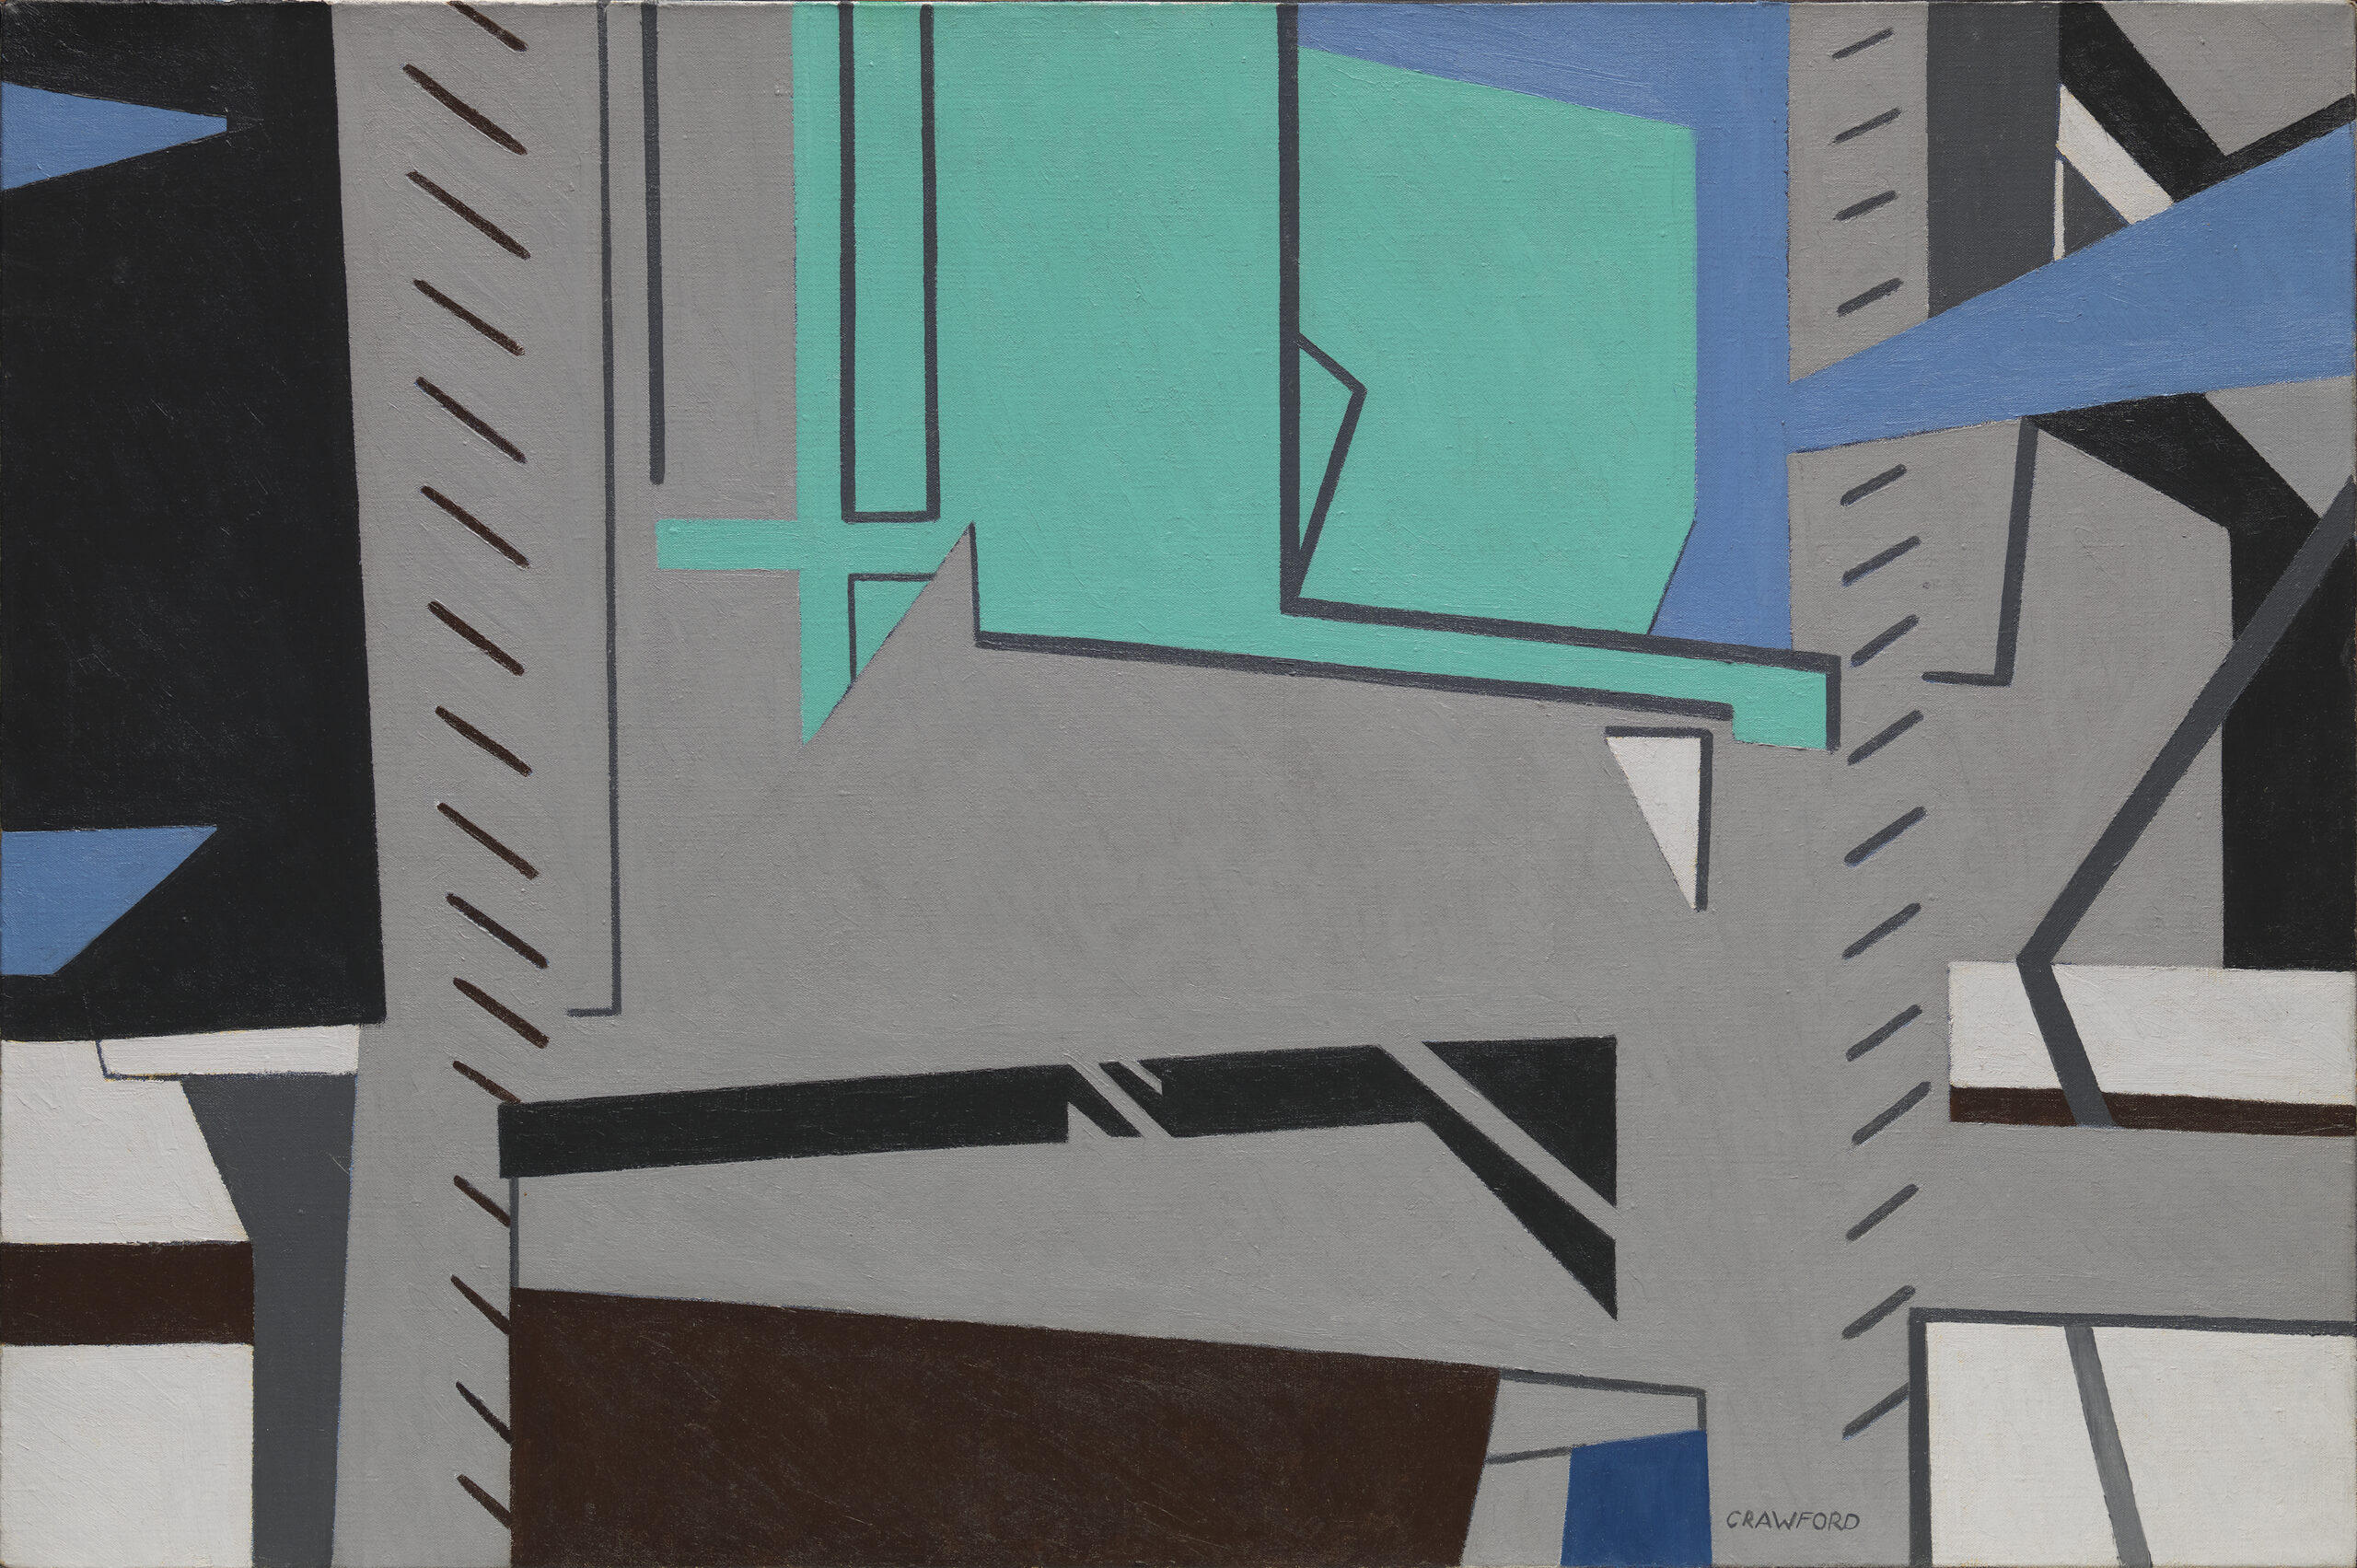 Geometric shapes of grey, teal, blue and black with diagonal dashes that outline a large grey shape resembling a building.